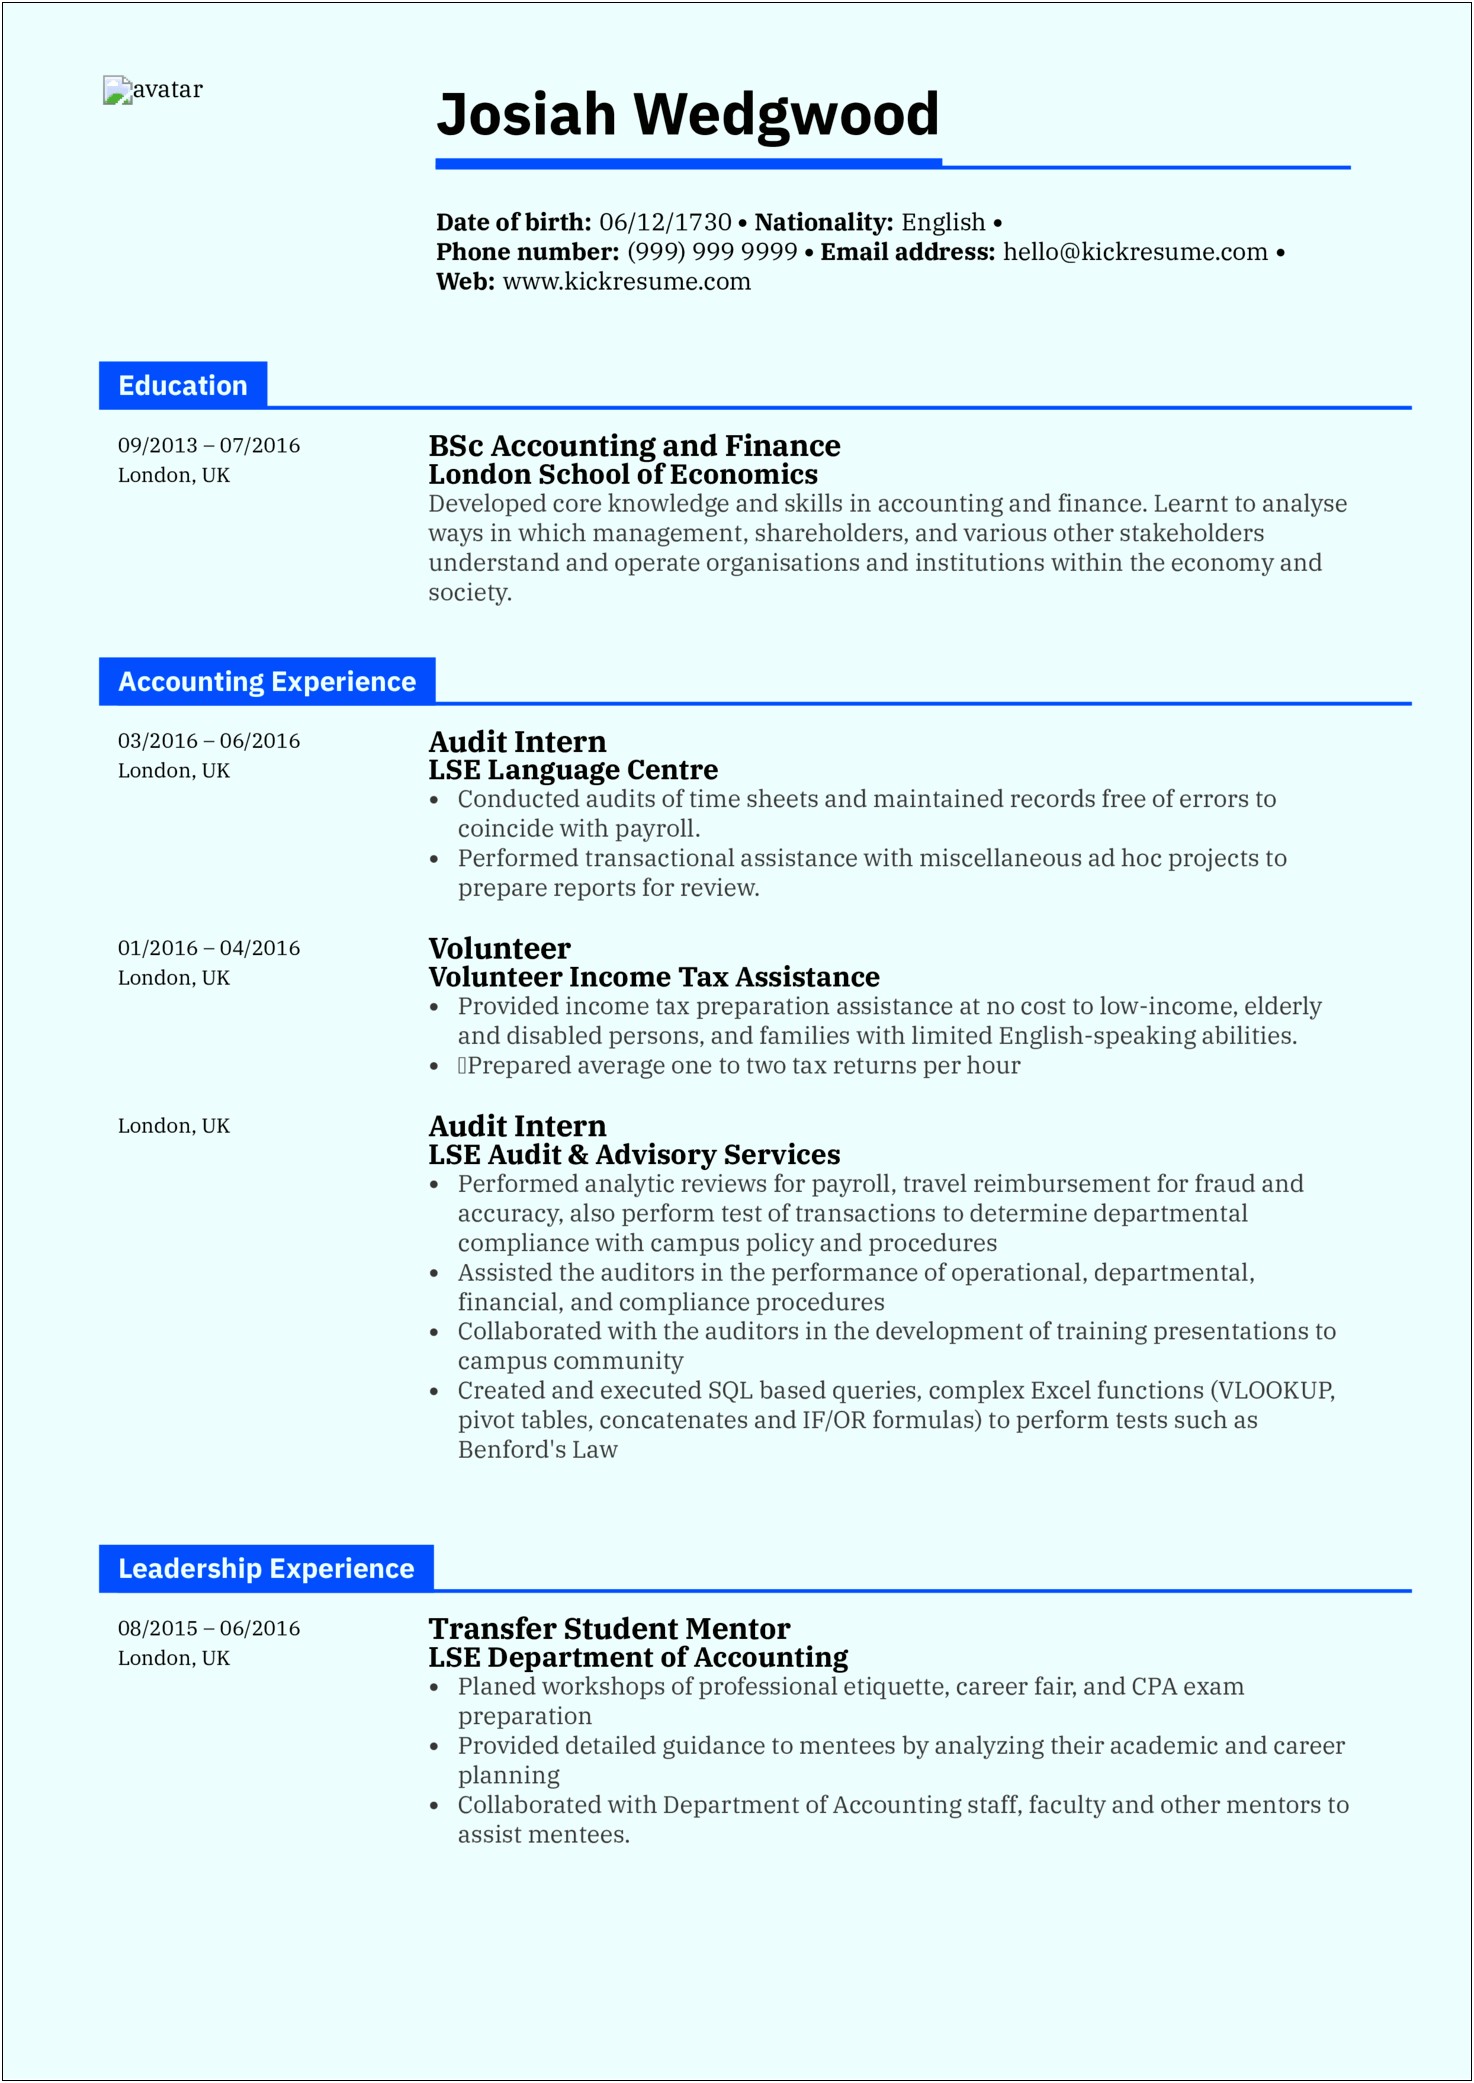 Resume Format For Accountant Job For Fresher